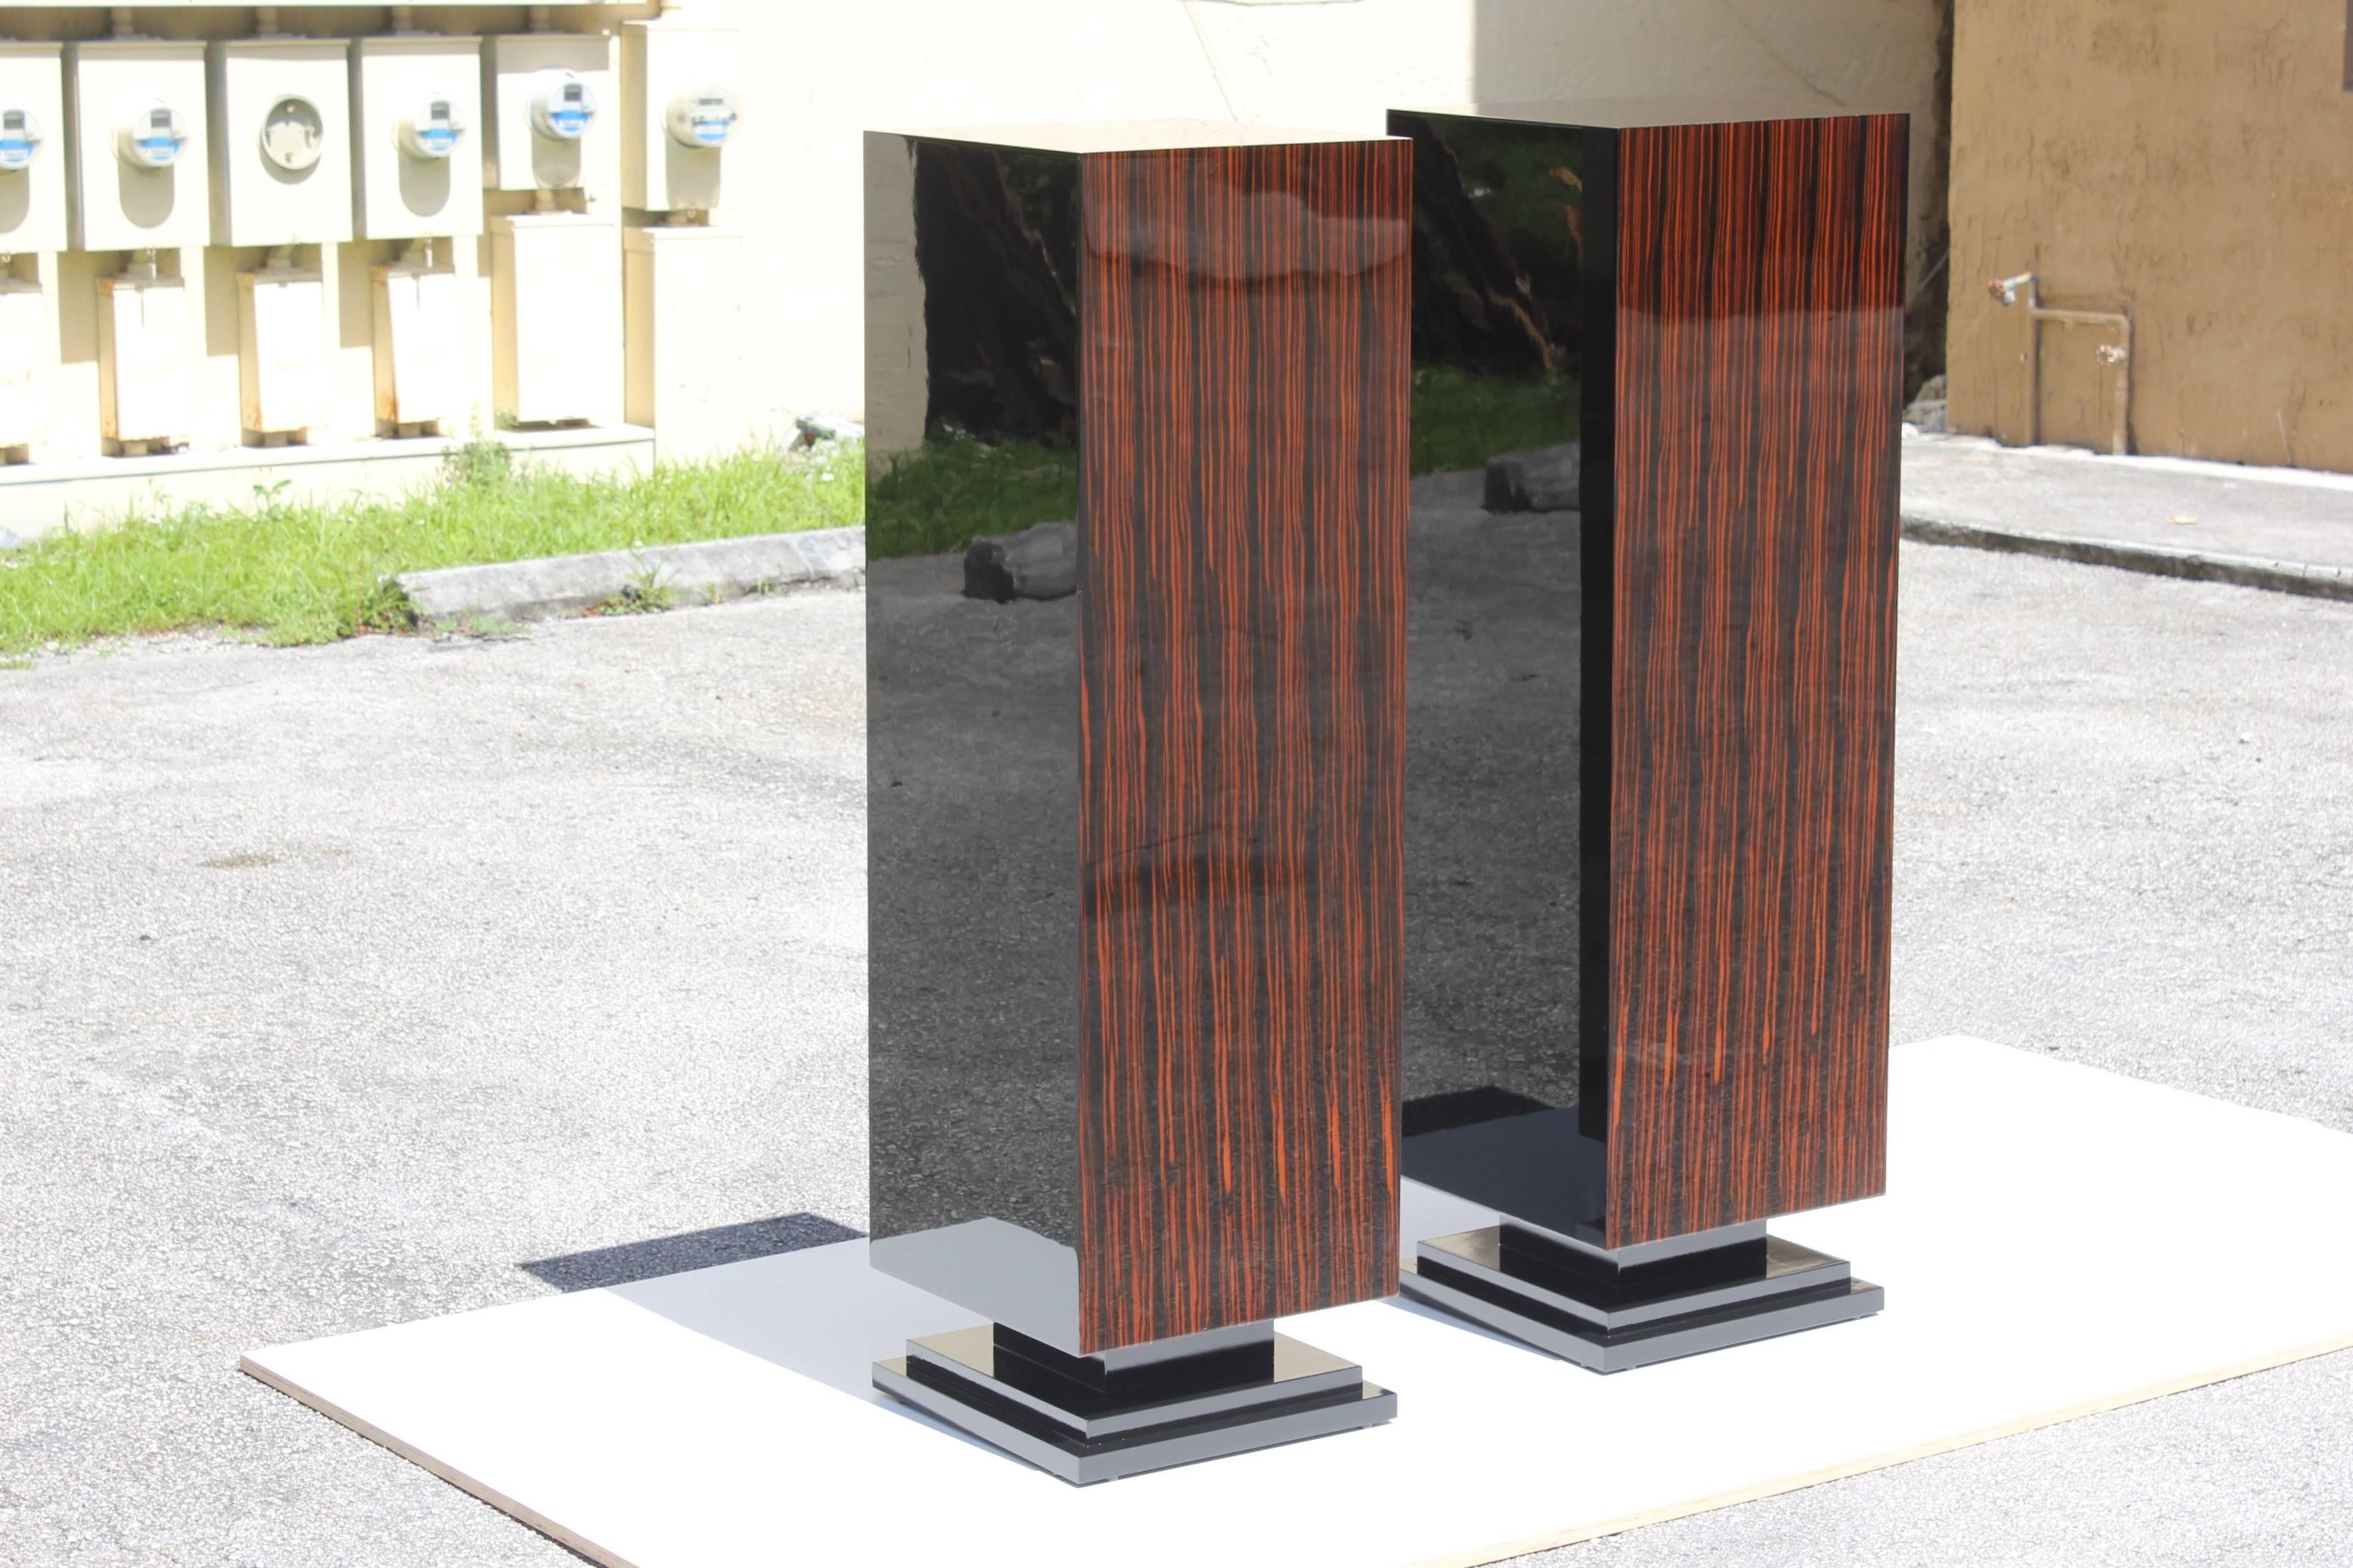 Beautiful pair of French Art Deco exotic Macassar ebony pedestals, circa 1940s. Square geometric bases. These pedestals are Macassar ebony and black lacquer, high-gloss finish and they can be appreciated from anywhere in a room. Newly refinished and